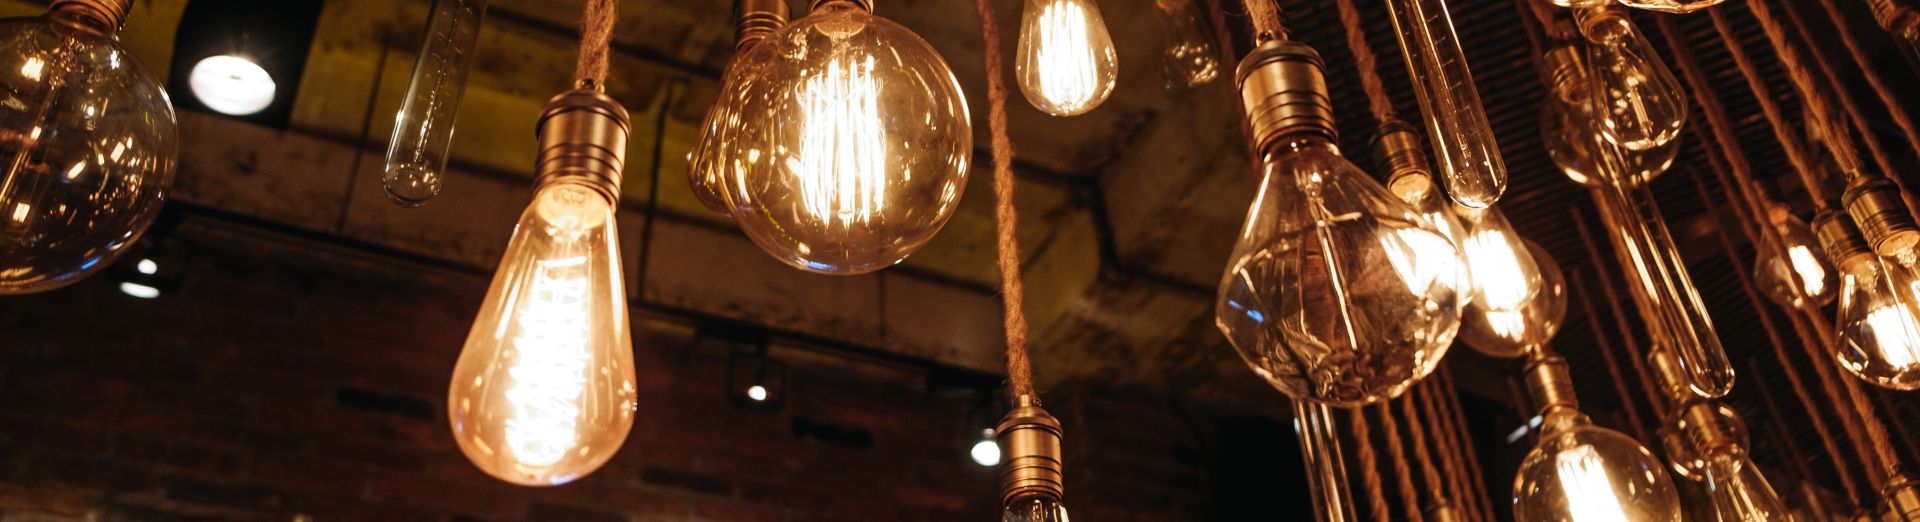 Low Angle View Of Illuminated Light Bulbs Hanging From Ceiling